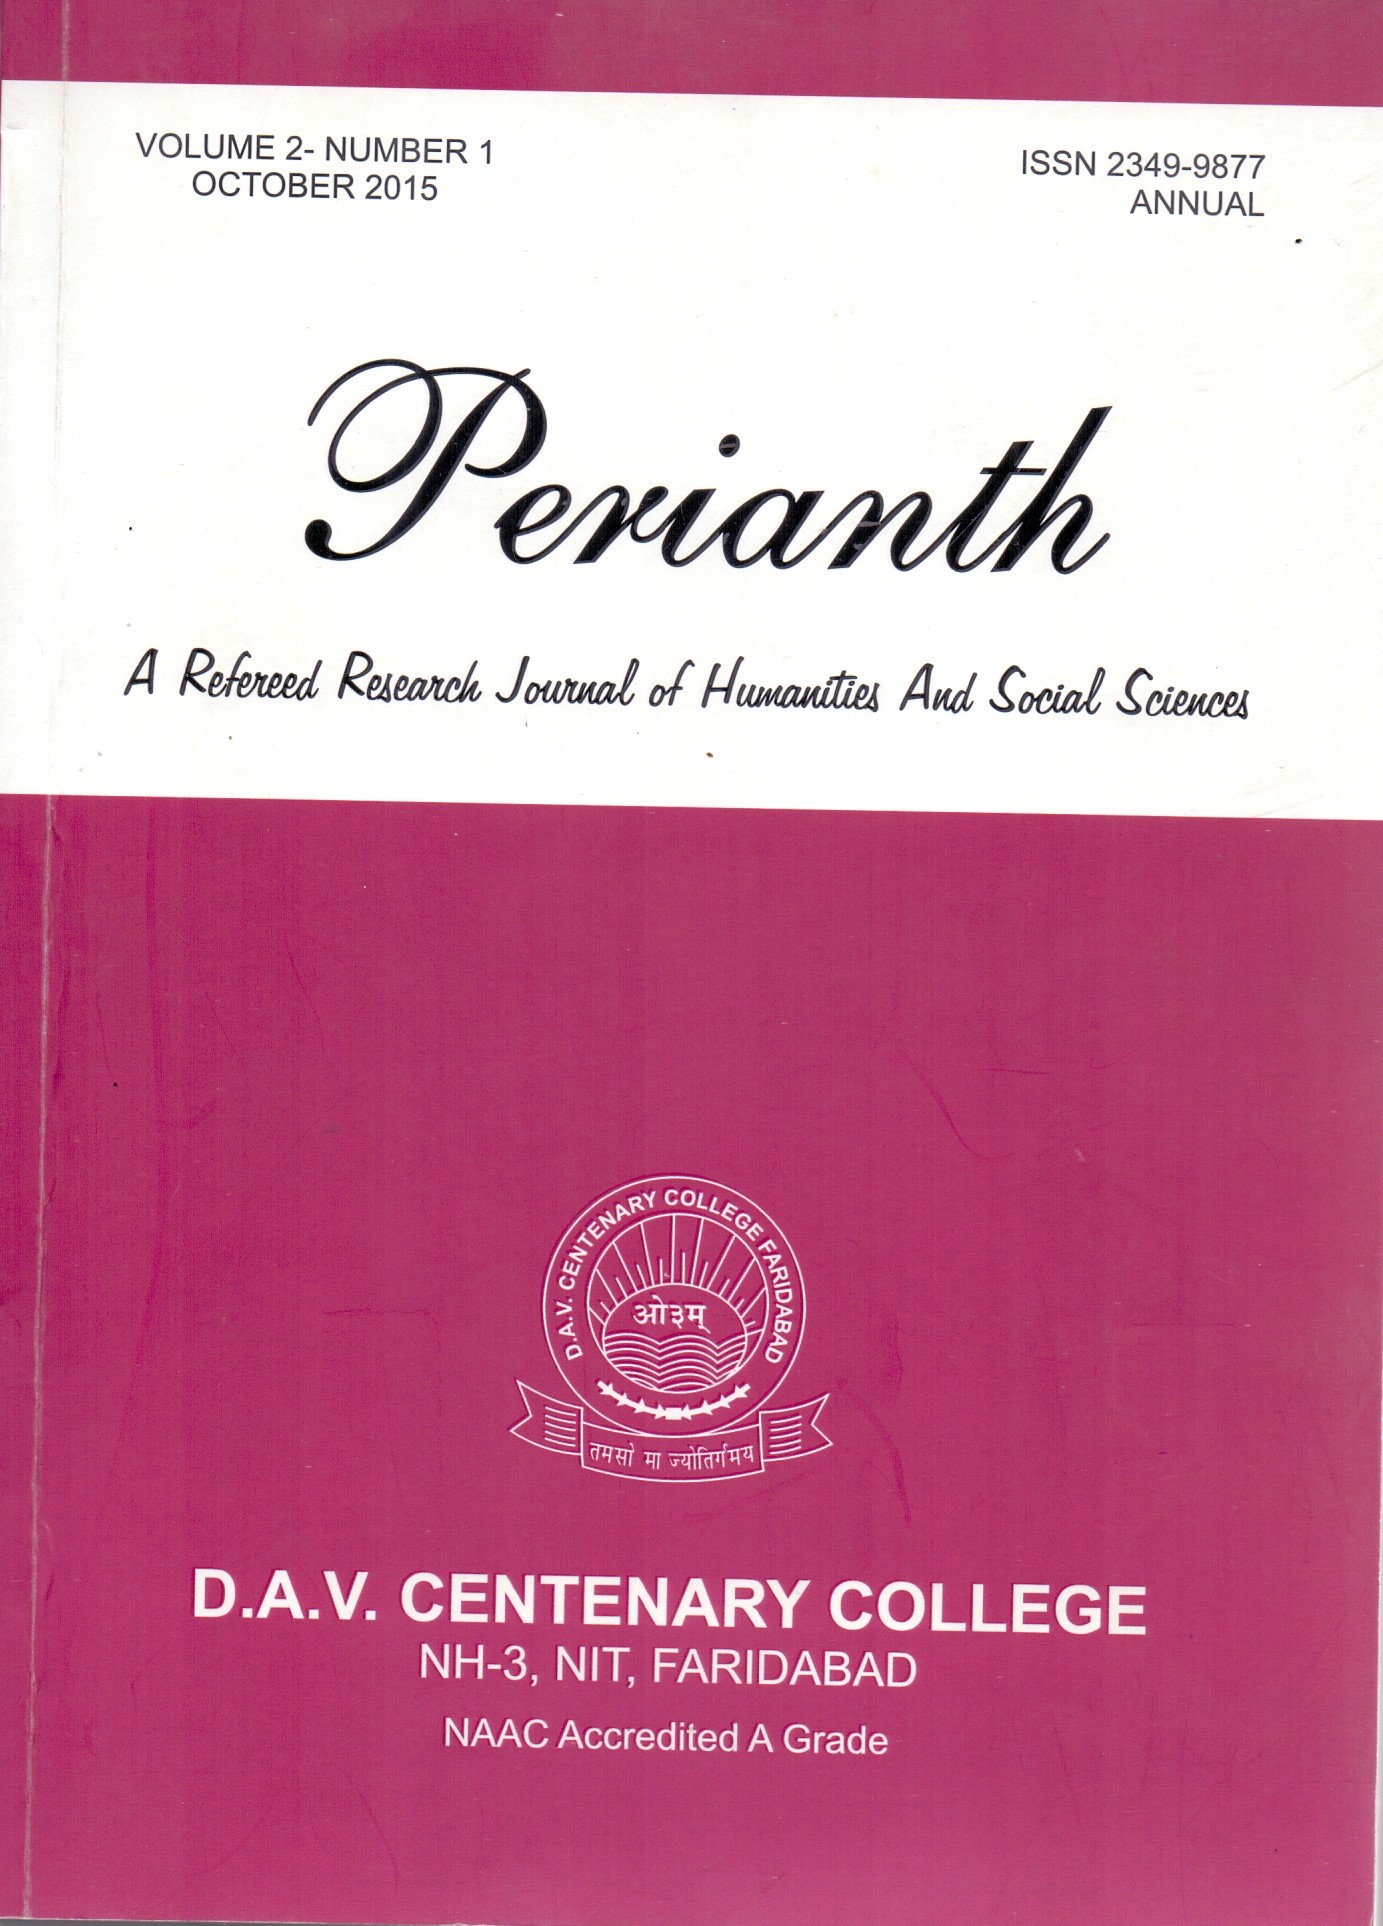 About Perianth Journal(Volume-2,Issue-1)